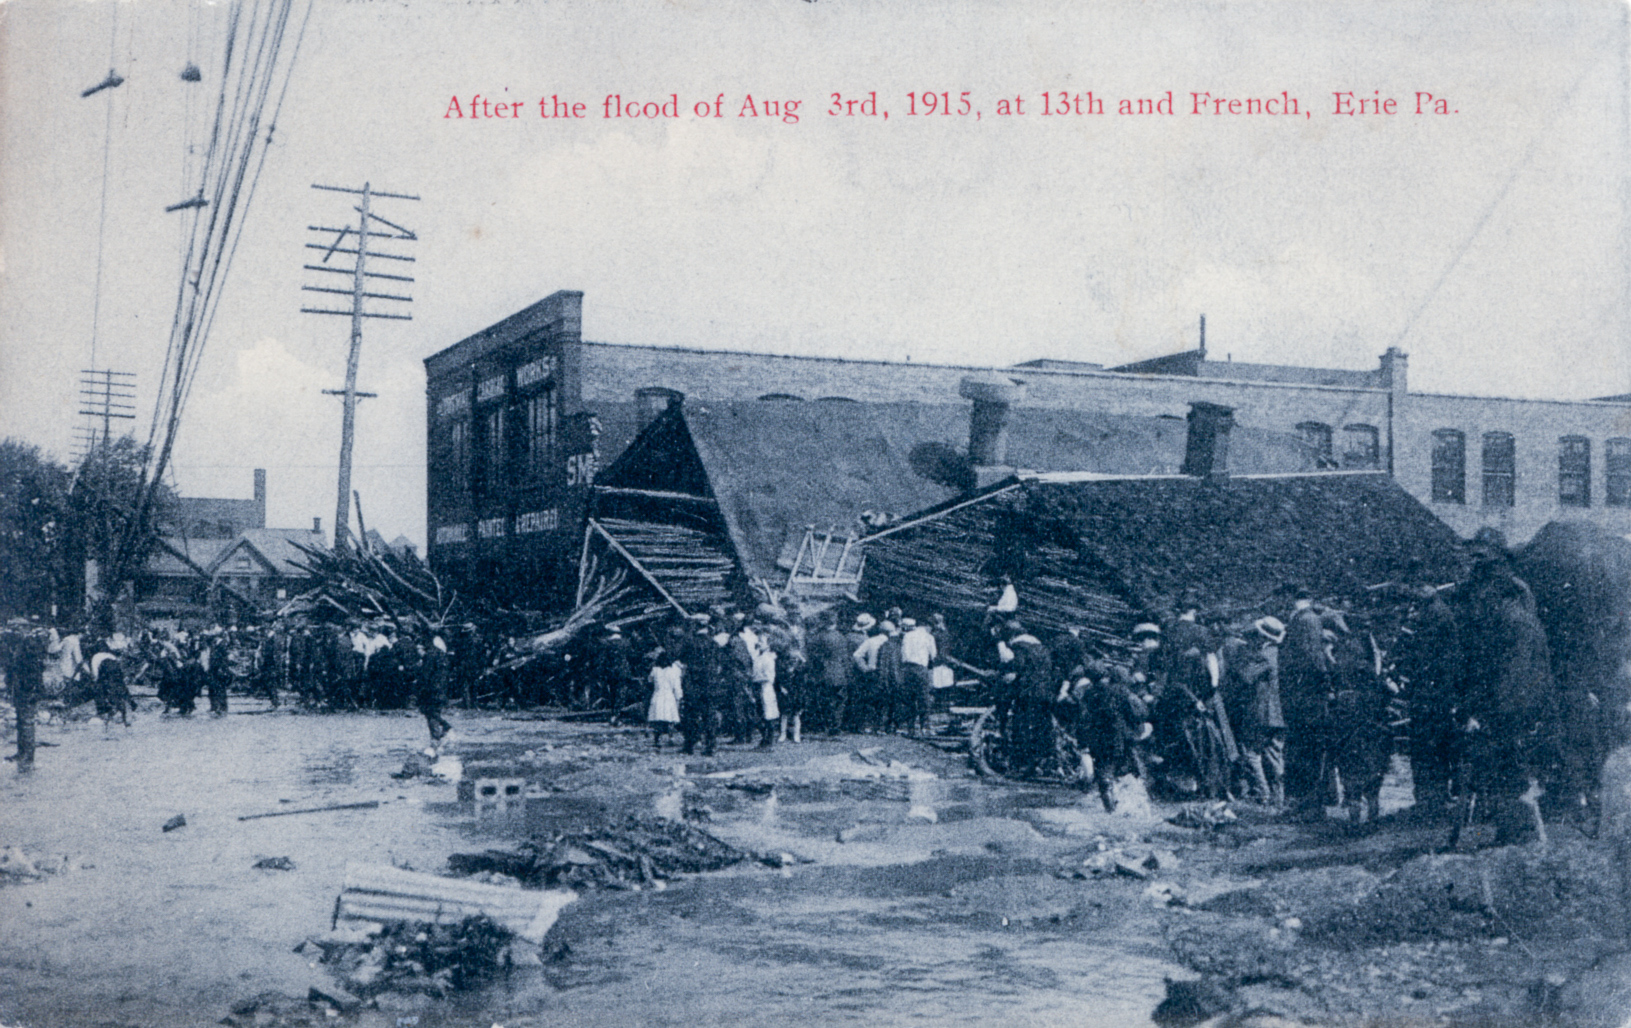 After the flood of Aug 3rd 1915, at 13th and French, Erie PA